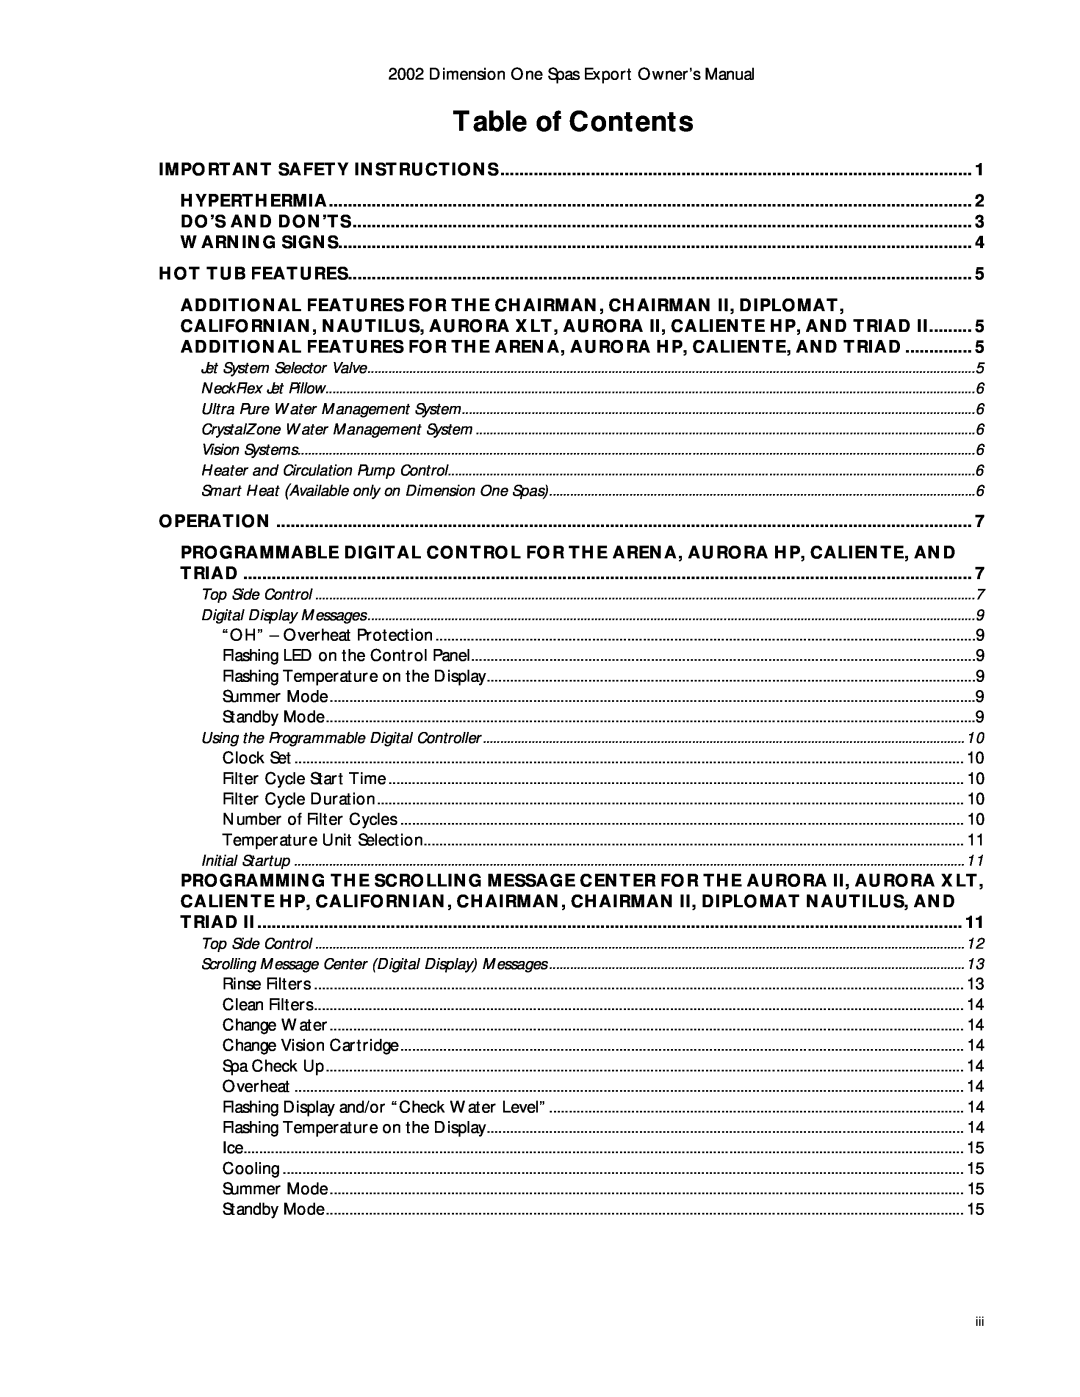 Dimension One Spas Dynamic Massage Sequencer manual Table of Contents 